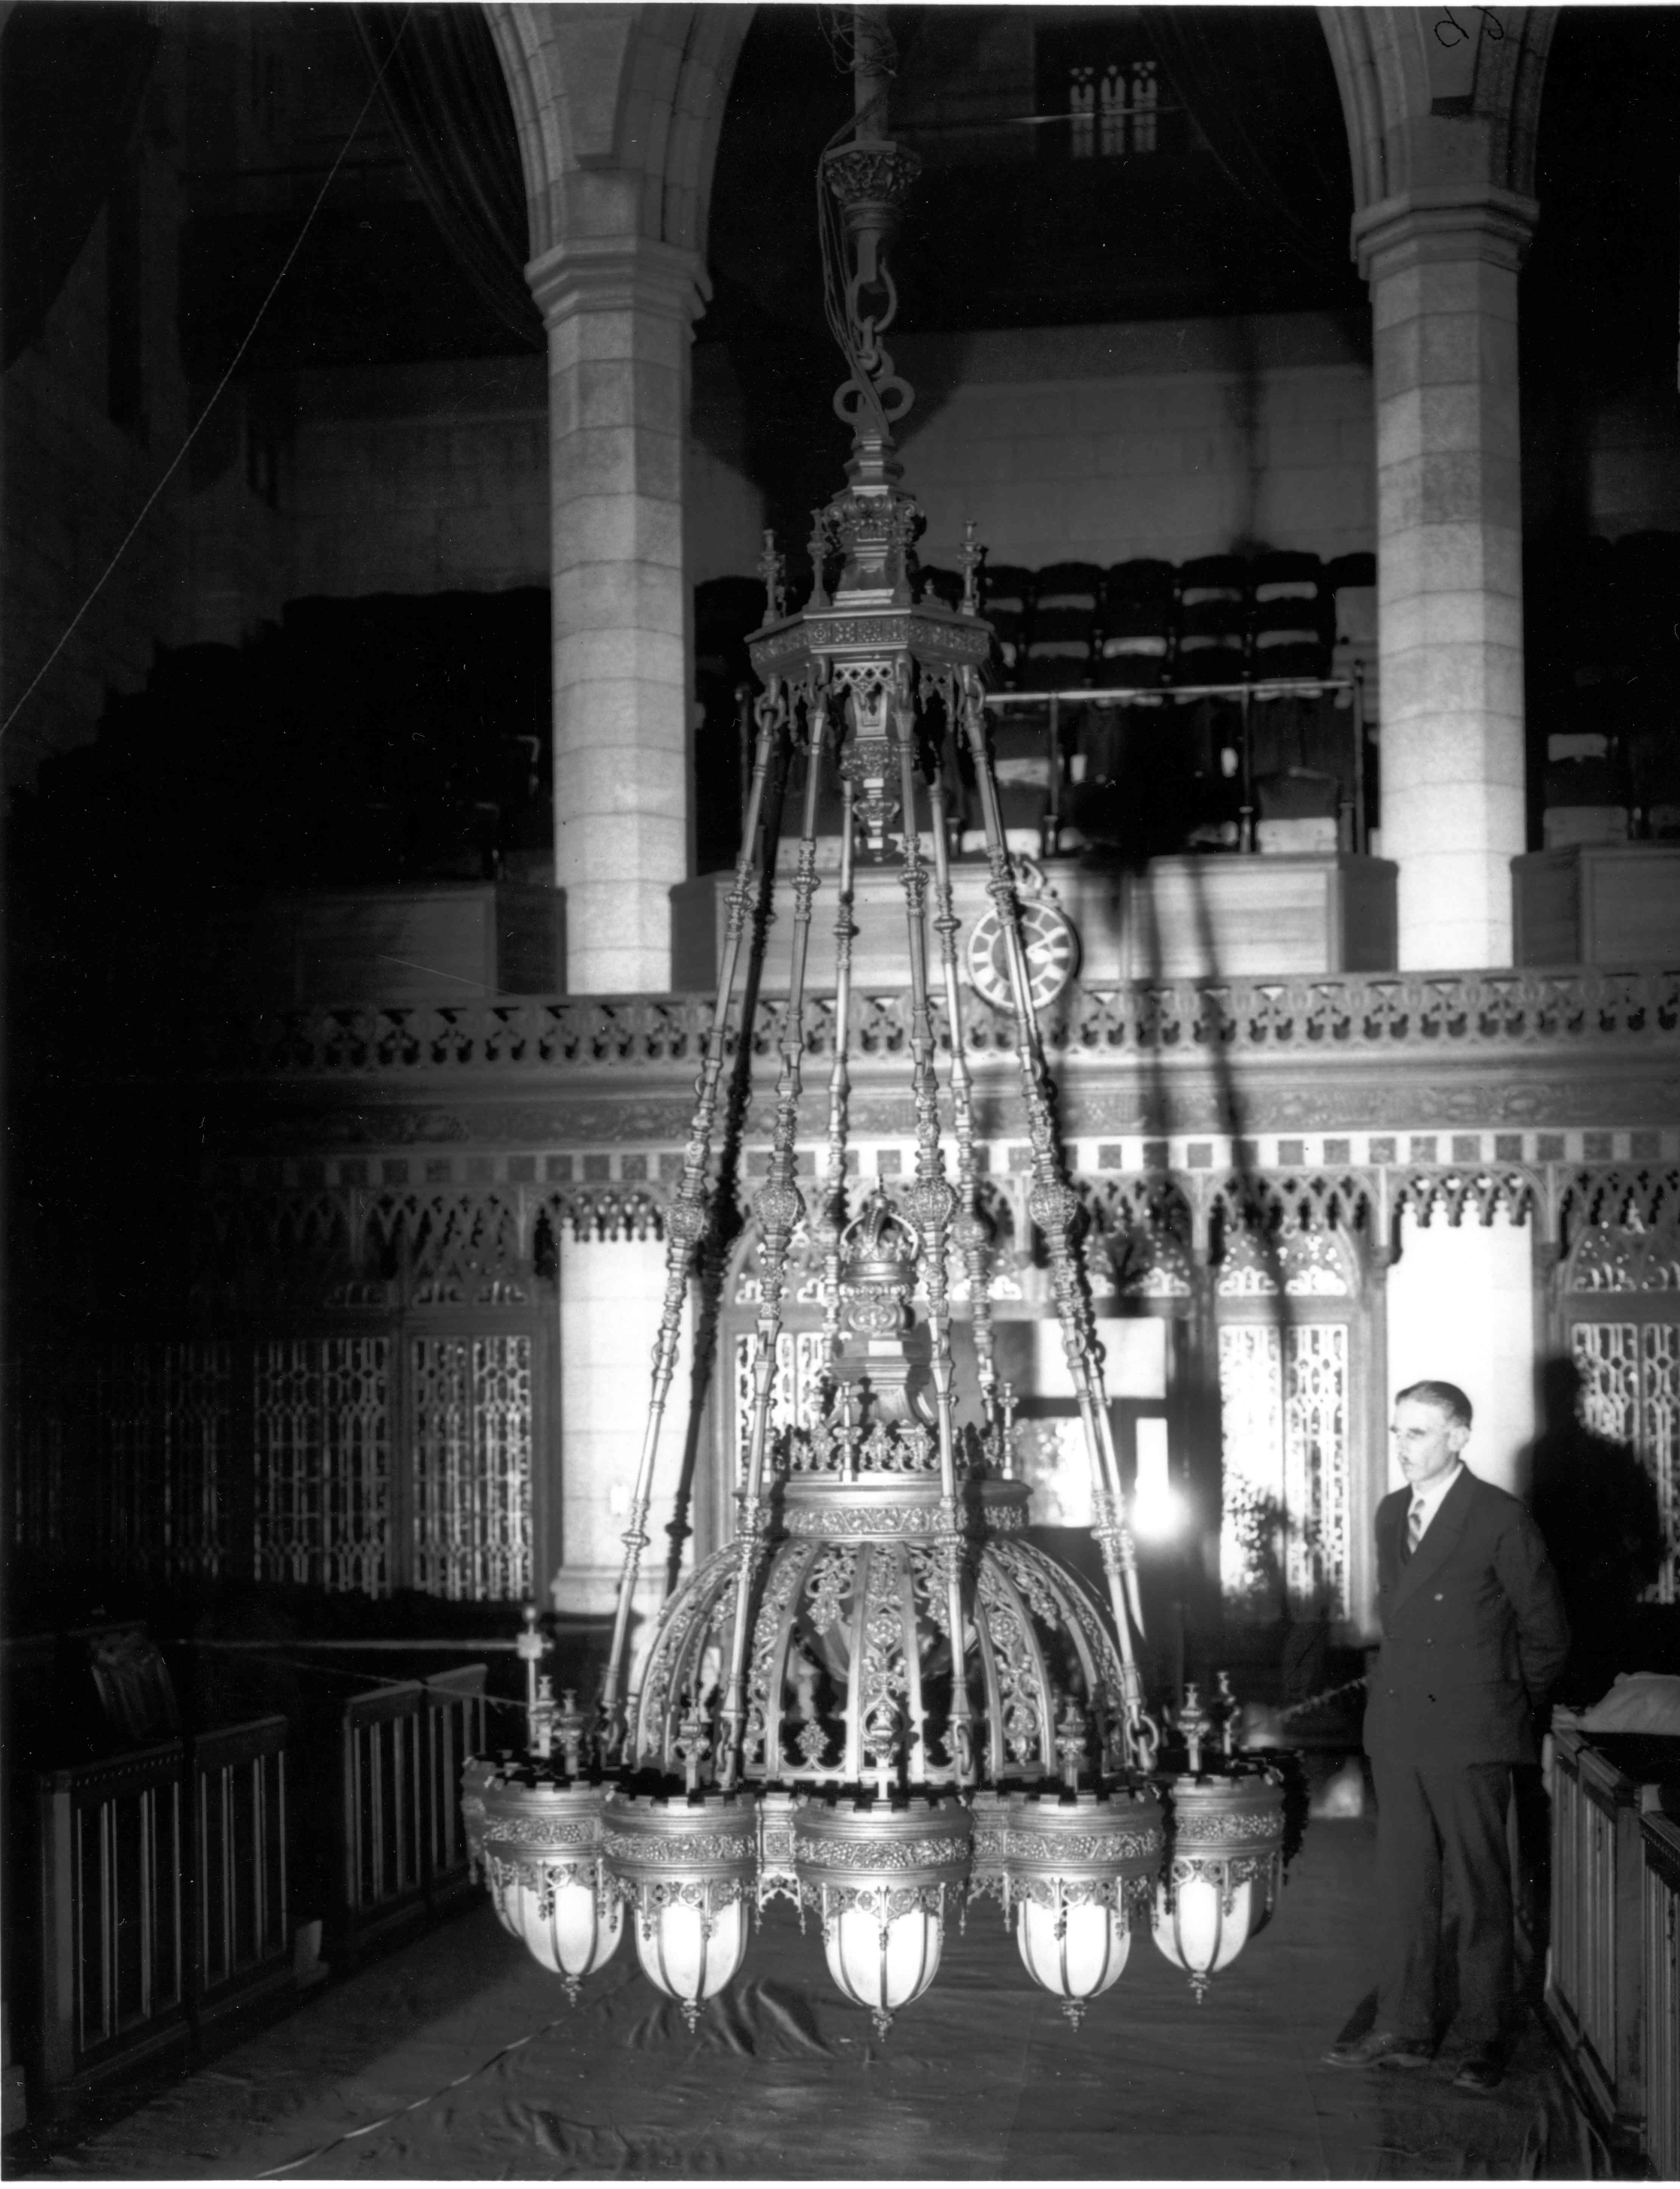 This undated photograph shows one of the Senate chandeliers, with its original egg-shaped lanterns, suspended close to the floor of the Red Chamber. Experts presume this image was taken prior to the lanterns’ replacement in the late 1950s. (Photo credit: Library and Archives Canada)